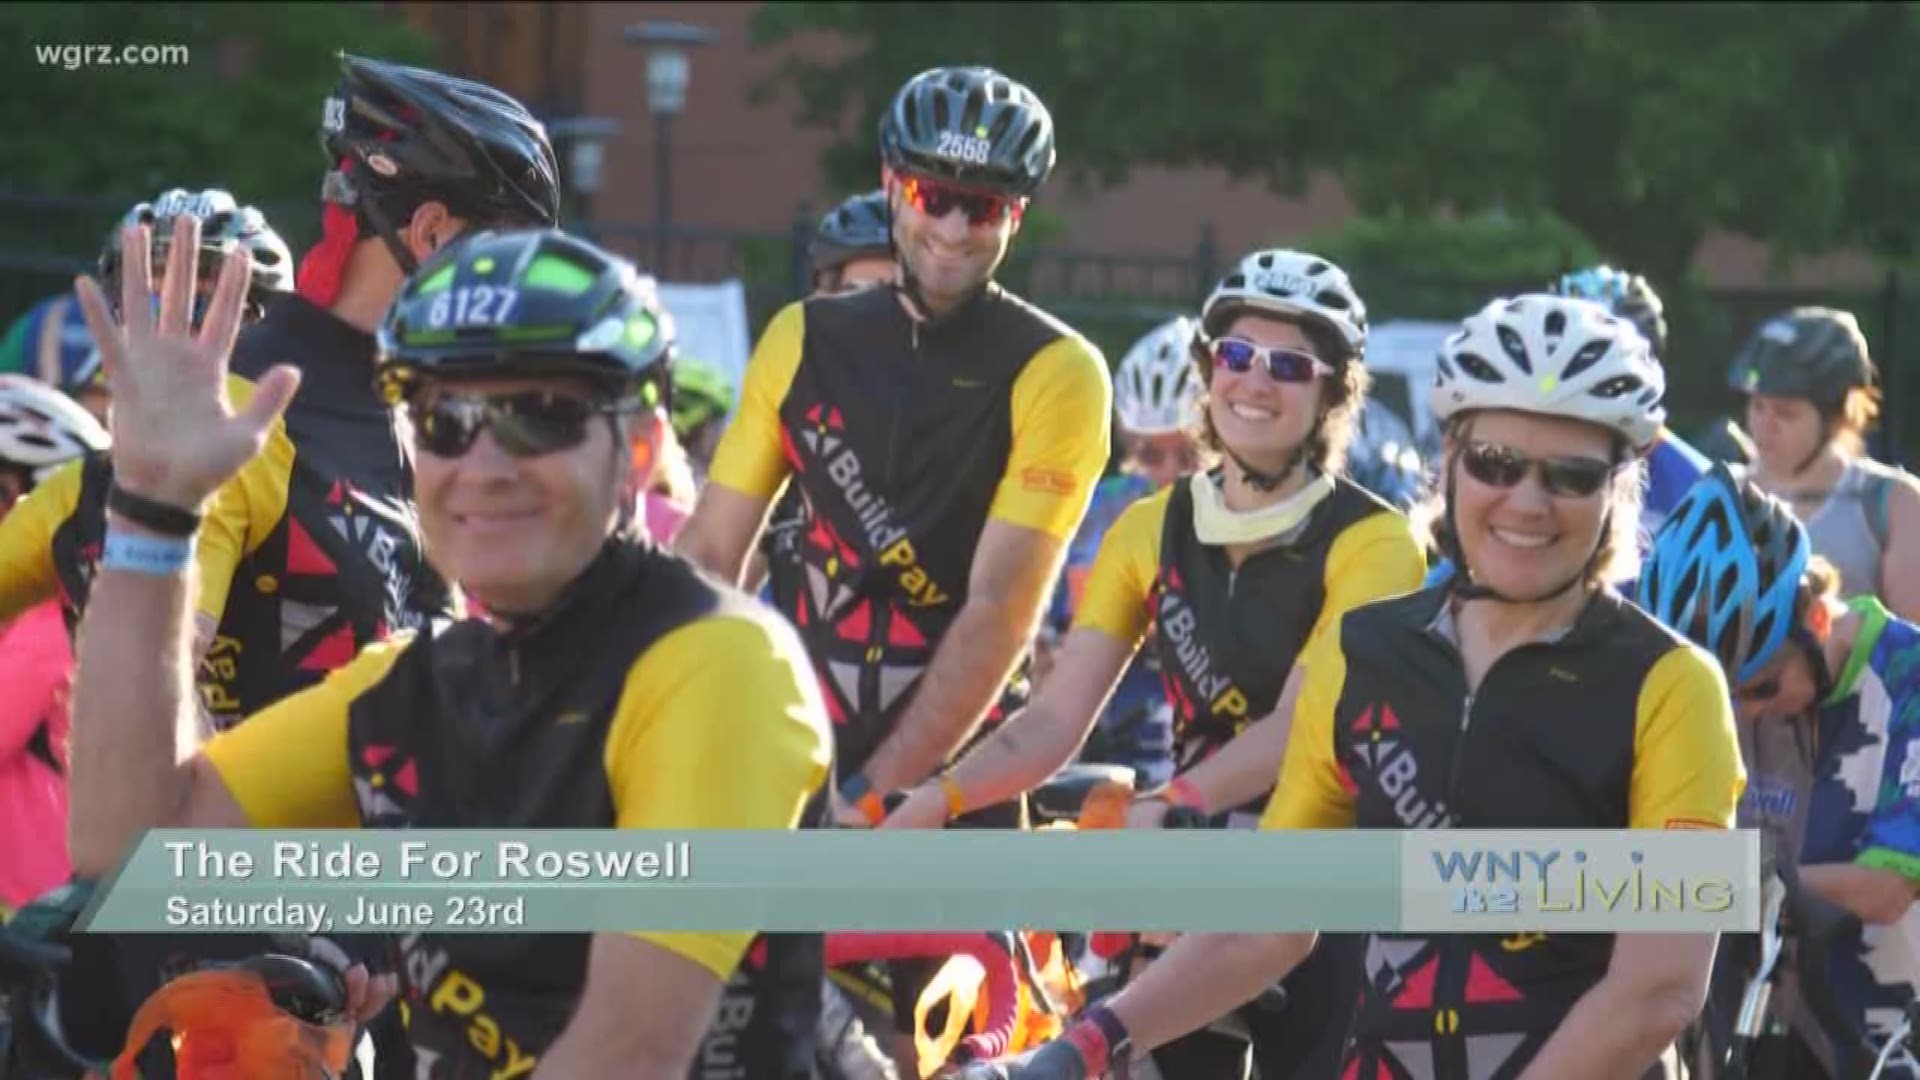 WNY Living - May 14 - Roswell Park Comprehensive Cancer Center